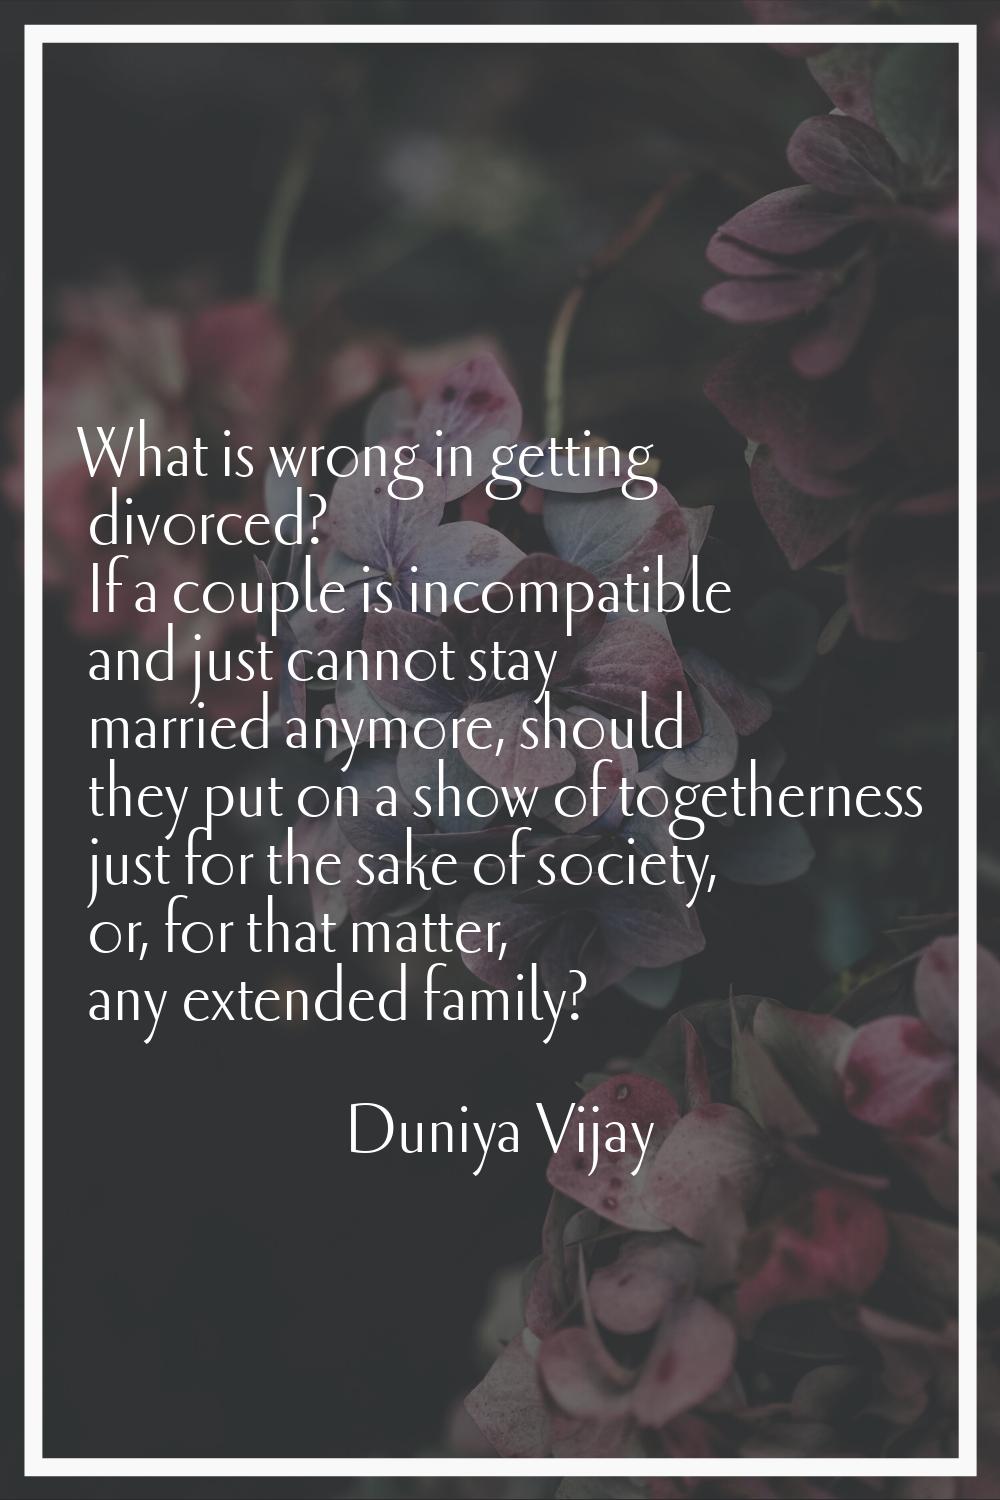 What is wrong in getting divorced? If a couple is incompatible and just cannot stay married anymore